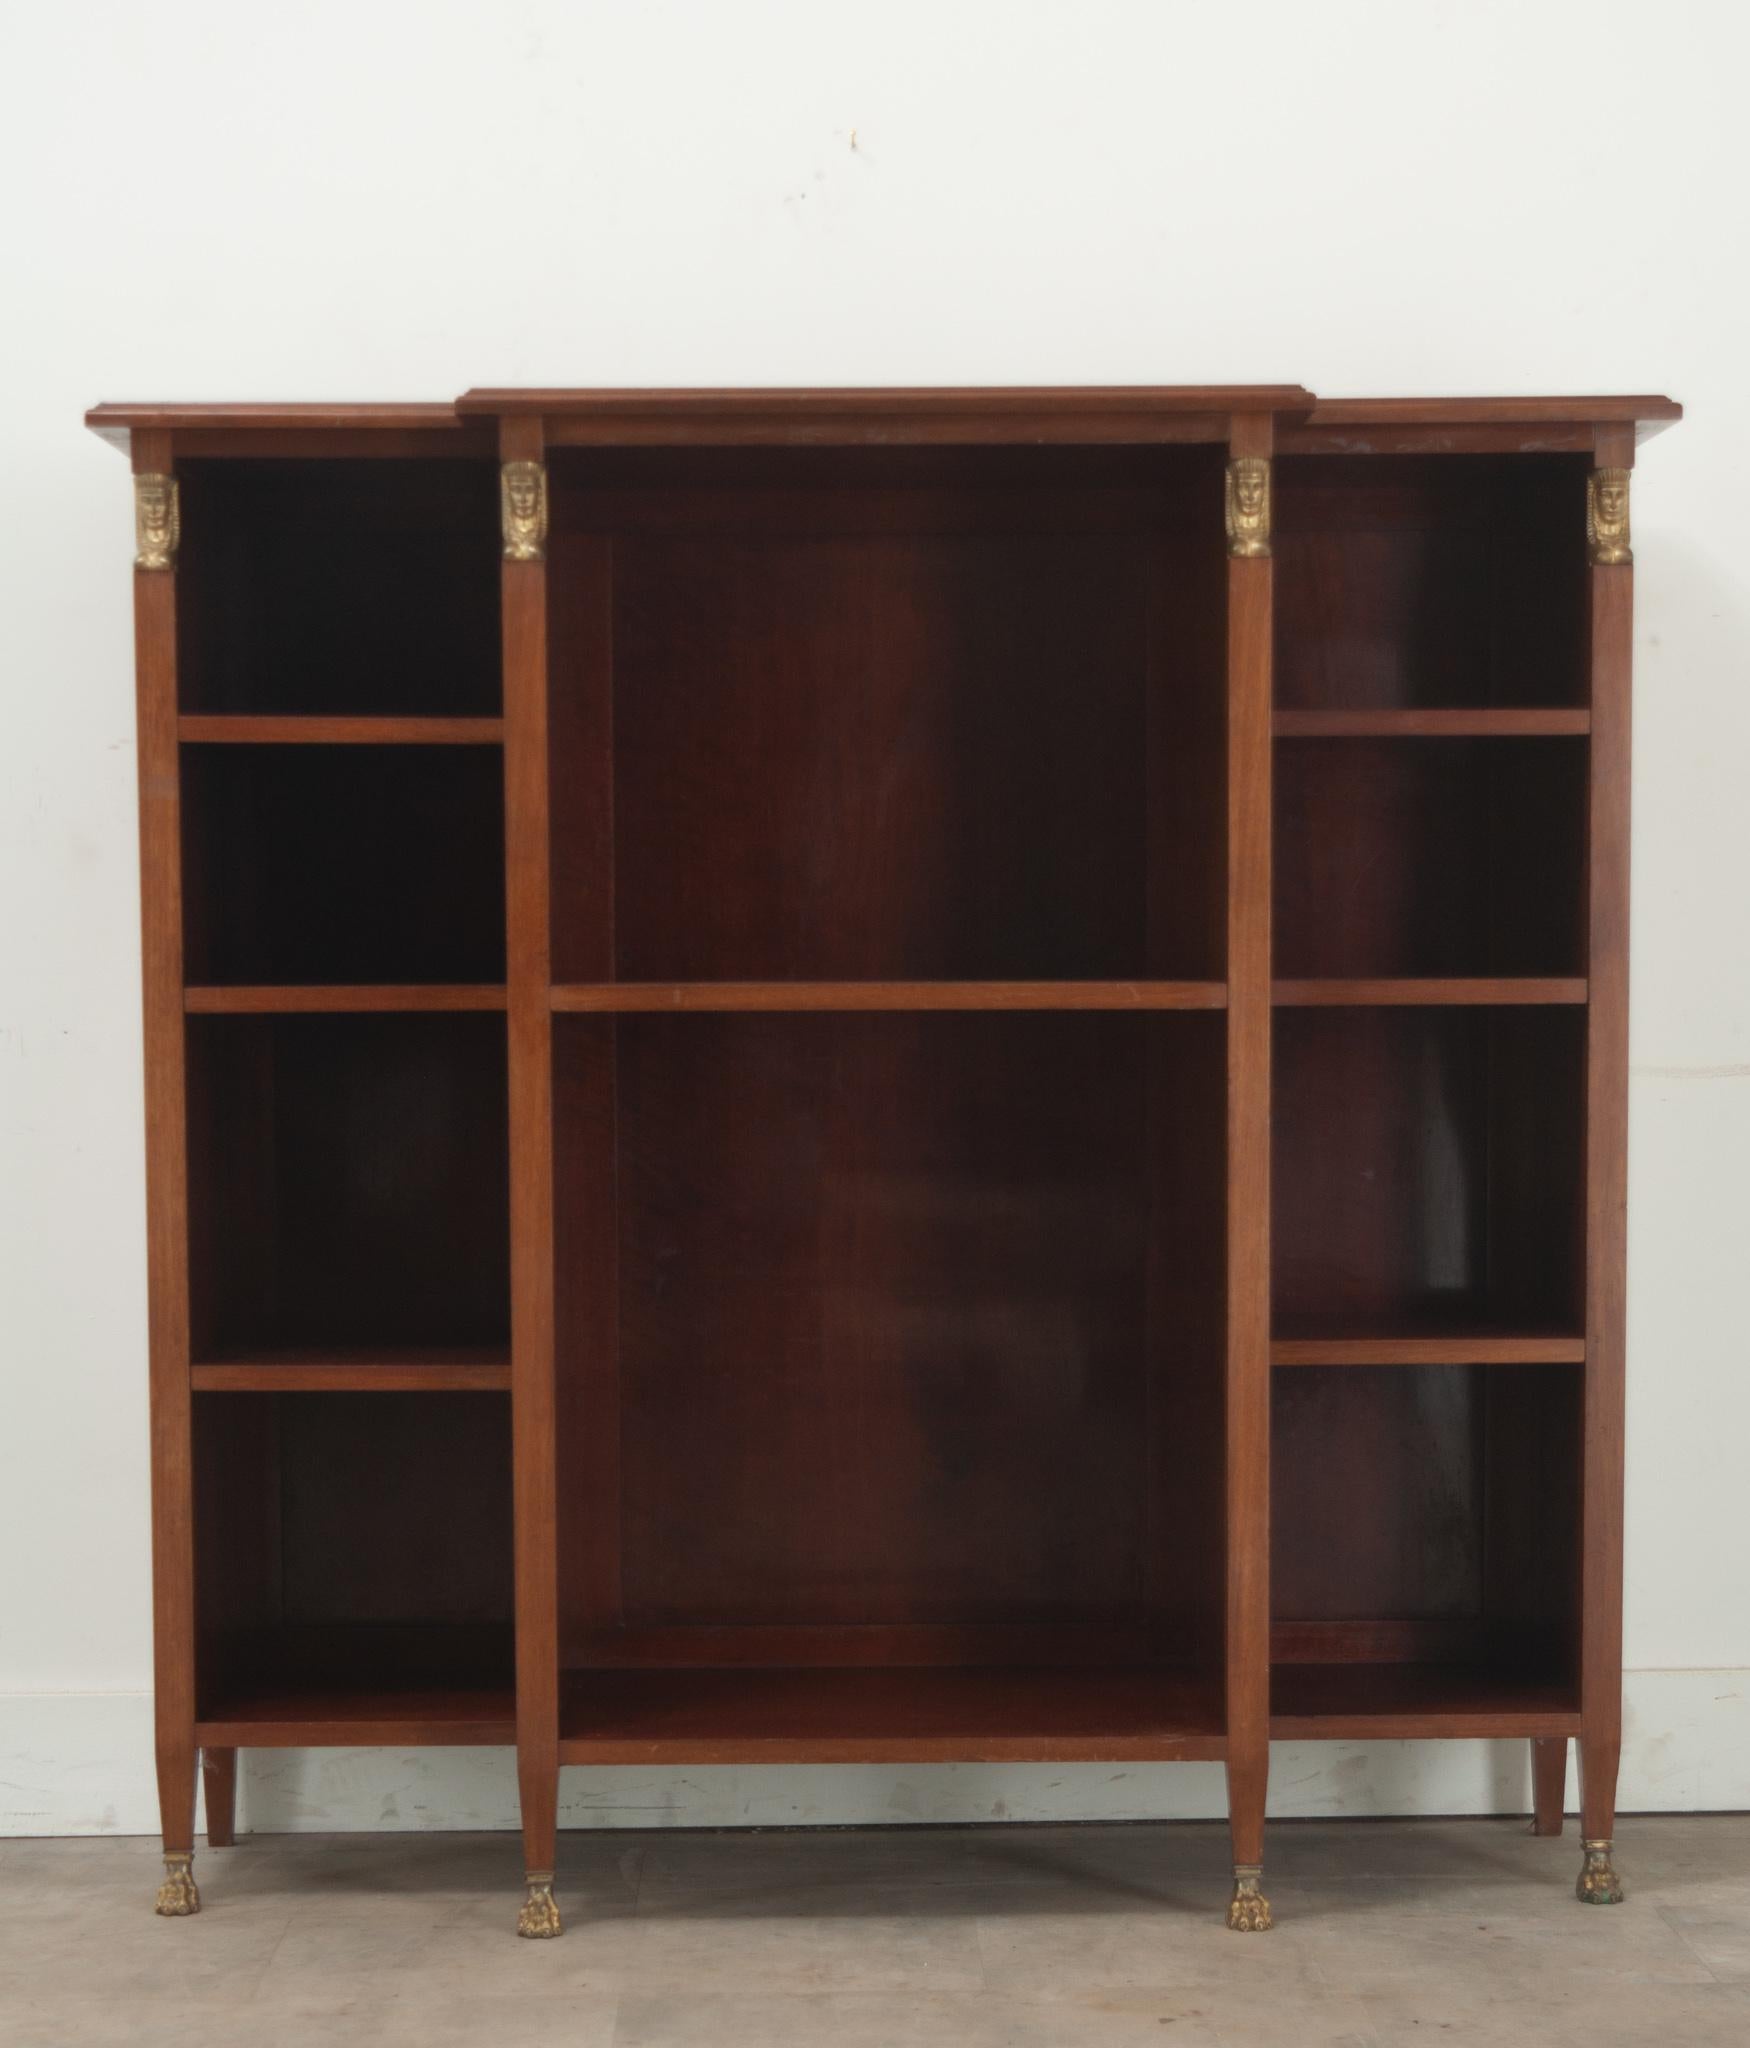 A practical Empire style bookshelf made of mahogany, perfect for storing your books and display objects. The center and deepest cavity has a single 16” deep adjustable shelf flanked by two more narrow cavities with three 12”deep adjustable shelves.